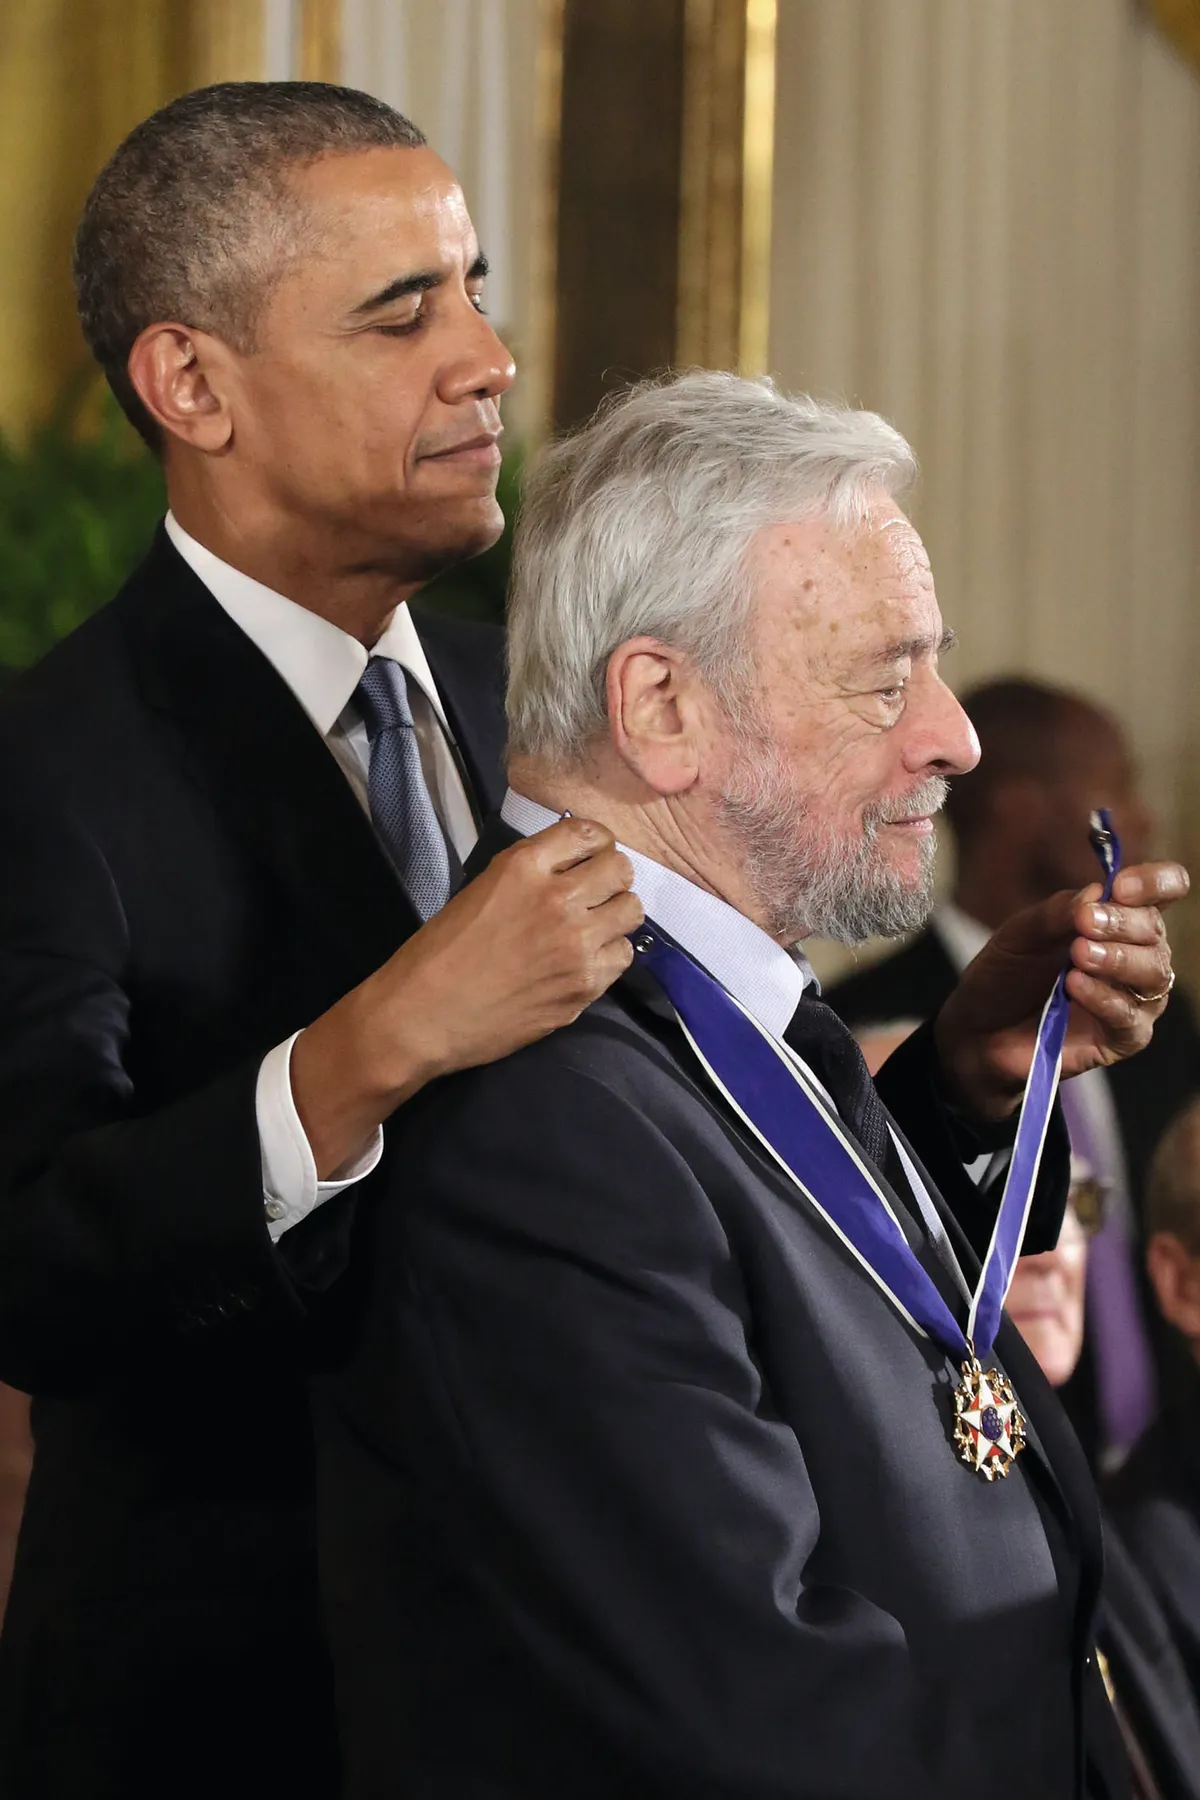 WASHINGTON, DC - NOVEMBER 24: U.S. President Barack Obama presents musical theater master Stephen Sondheim with the Presidential Medal of Freedom during a ceremony in the East Room of the White House November 24, 2015 in Washington, DC. Obama presented the medal to thirteen living and four posthumous pioneers in science, sports, public service, human rights, politics and arts, (Photo by Chip Somodevilla/Getty Images)